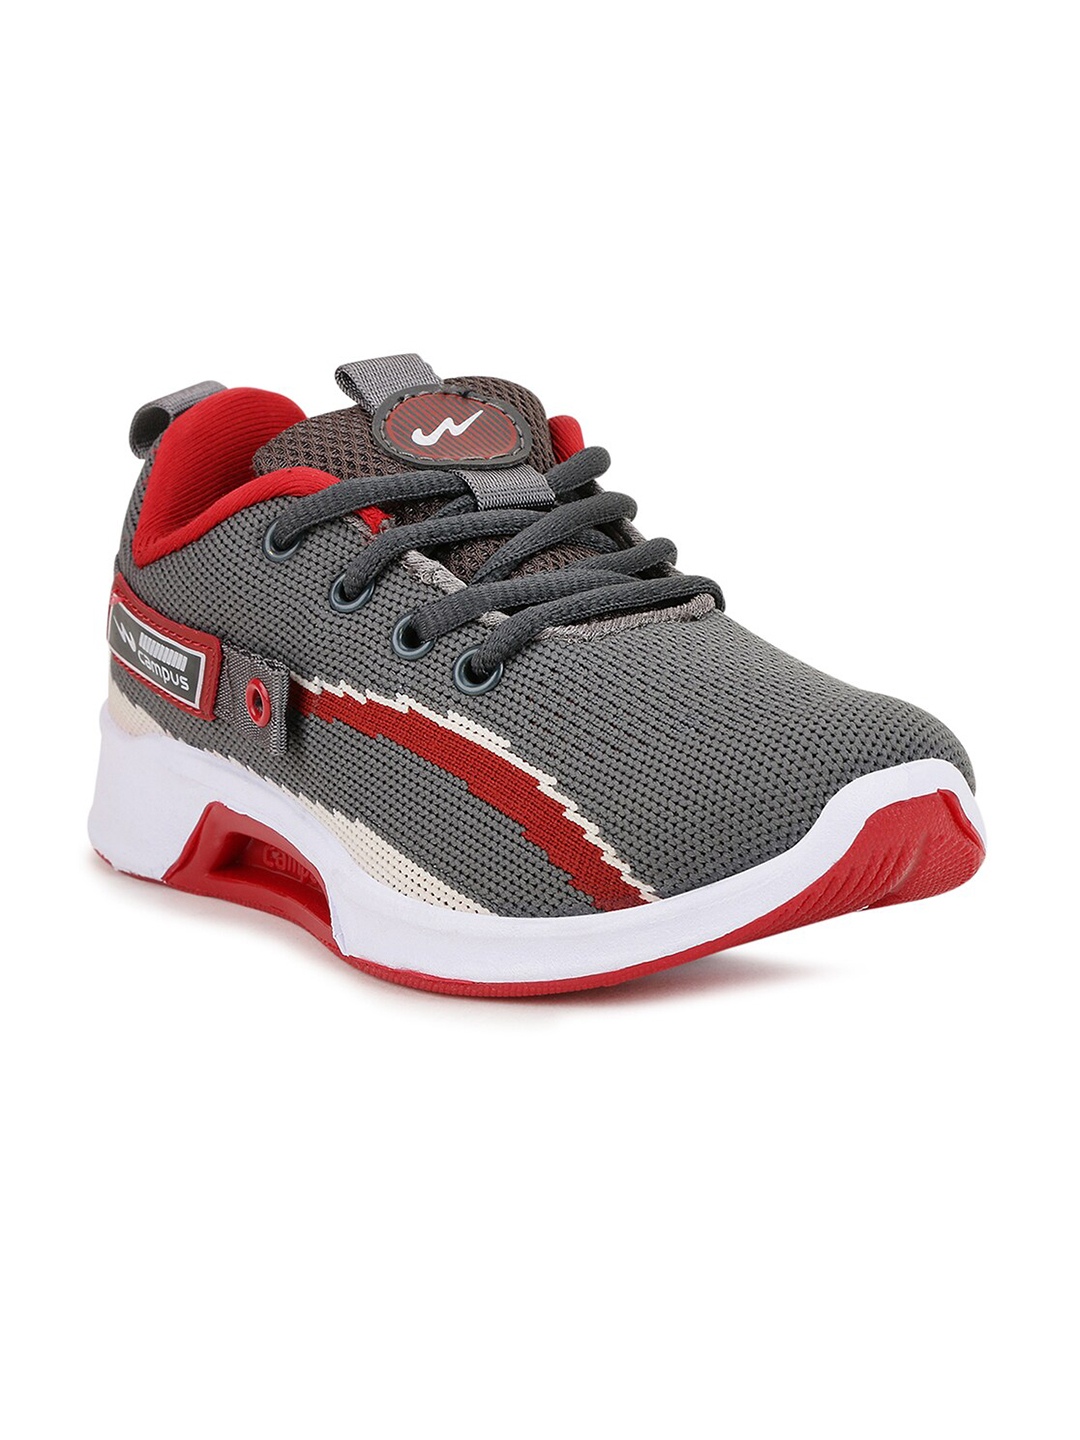 

Campus Unisex Kids Grey & Red Running Shoes